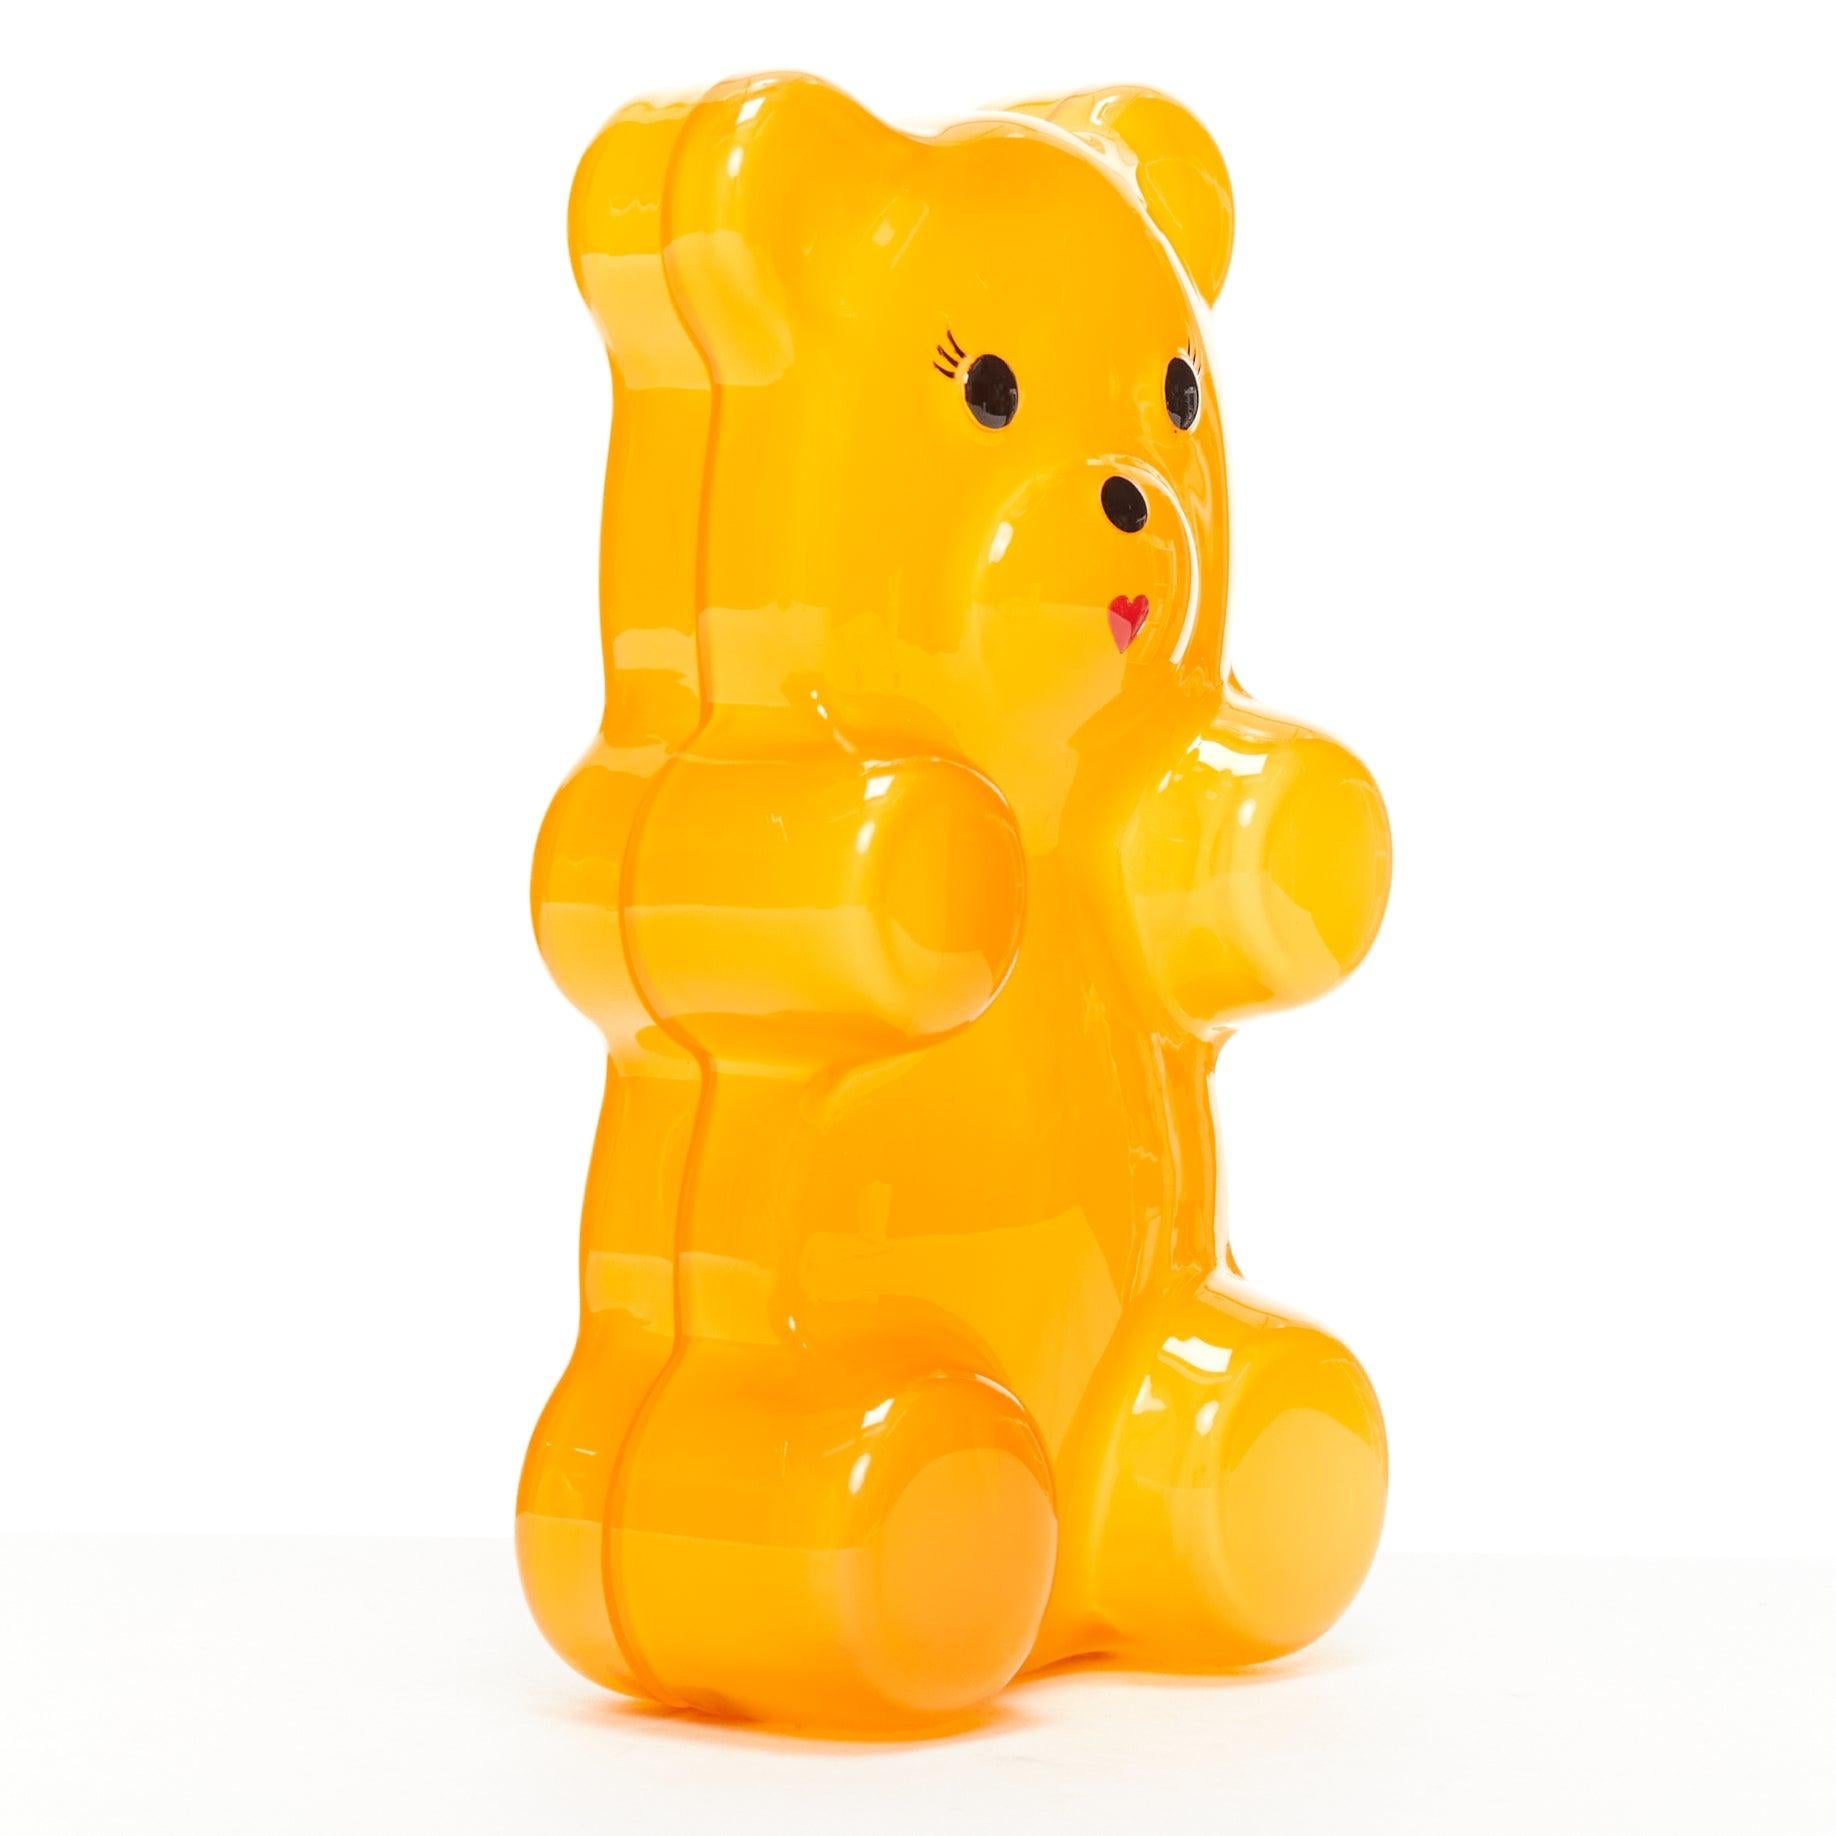 CHARLOTTE OLYMPIA egg yolk yellow gummy bear acrylic box clutch bag In Excellent Condition For Sale In Hong Kong, NT